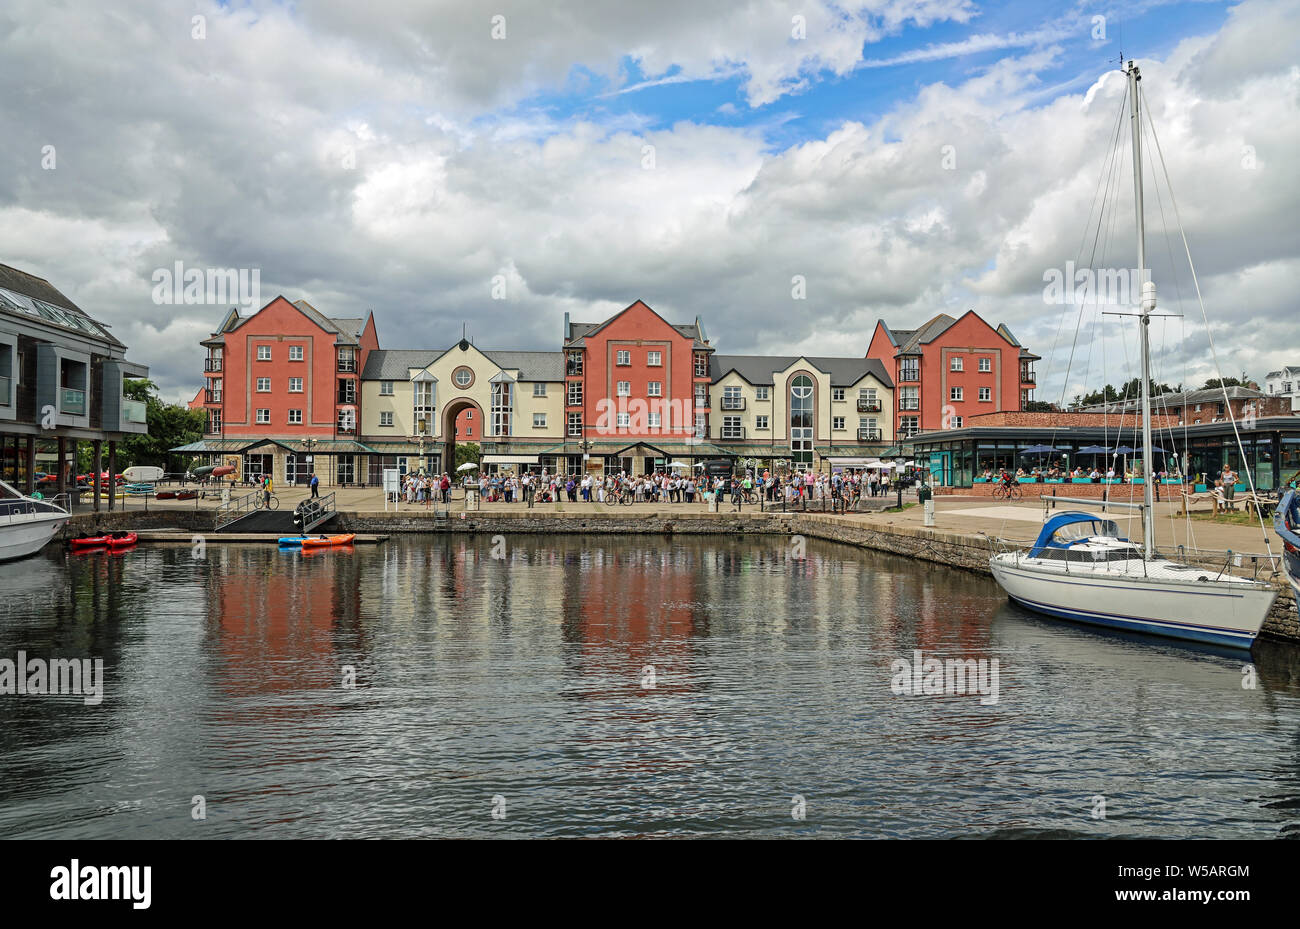 Exeter Quays at the end of the Exeter Shipping Canal, Europe’s oldest working shipping canal. A place of restuarants, shops including Rockfish. Stock Photo